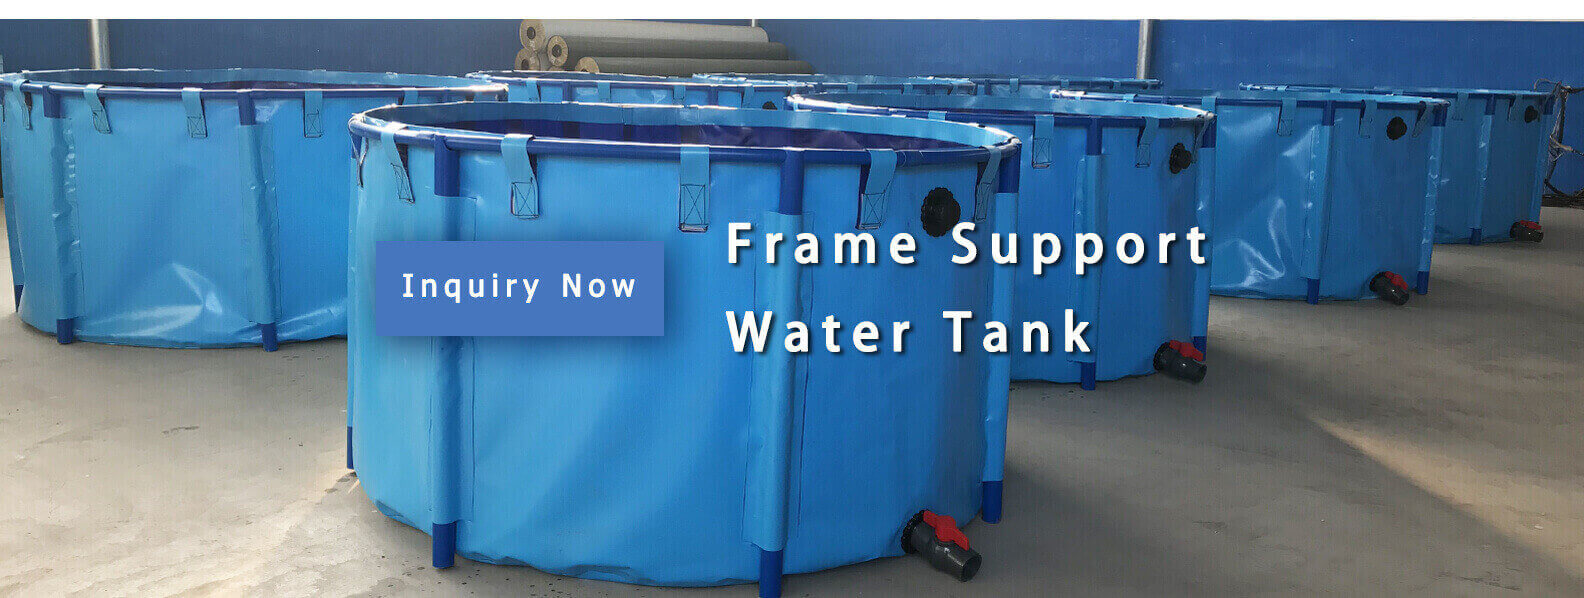 Frame Support Water Tank